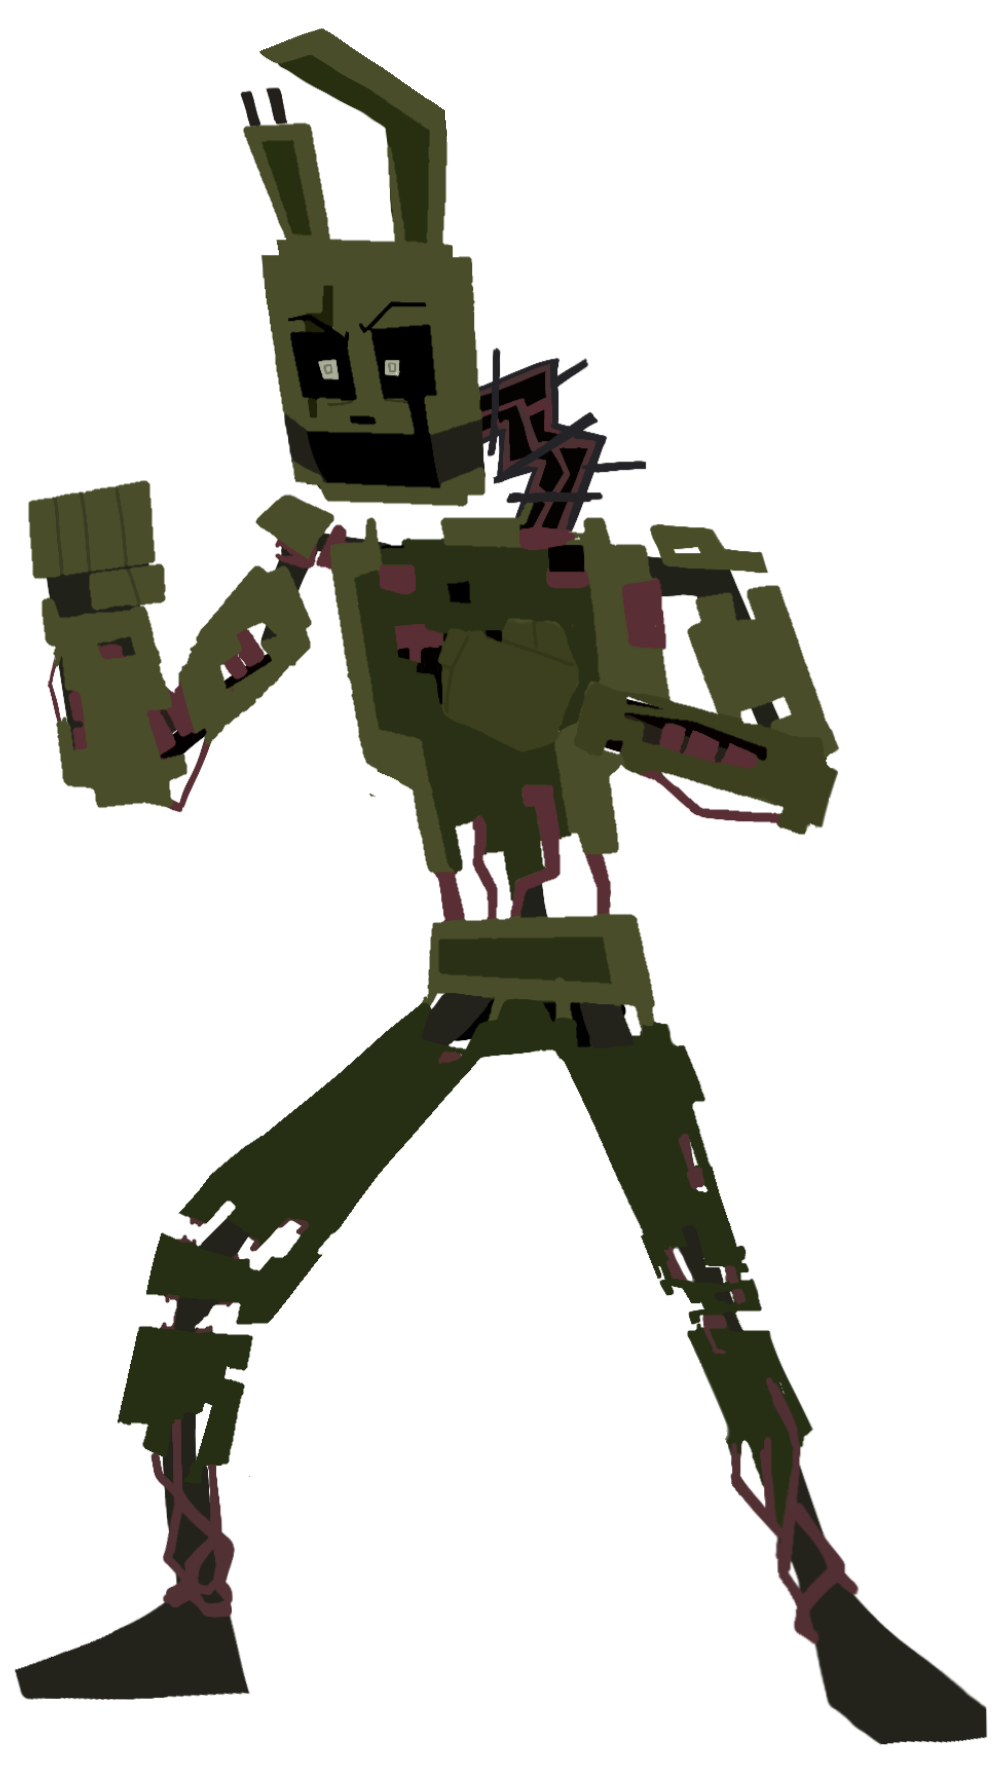 My Afton (SkullKiller) from my own representation of the Fnaf